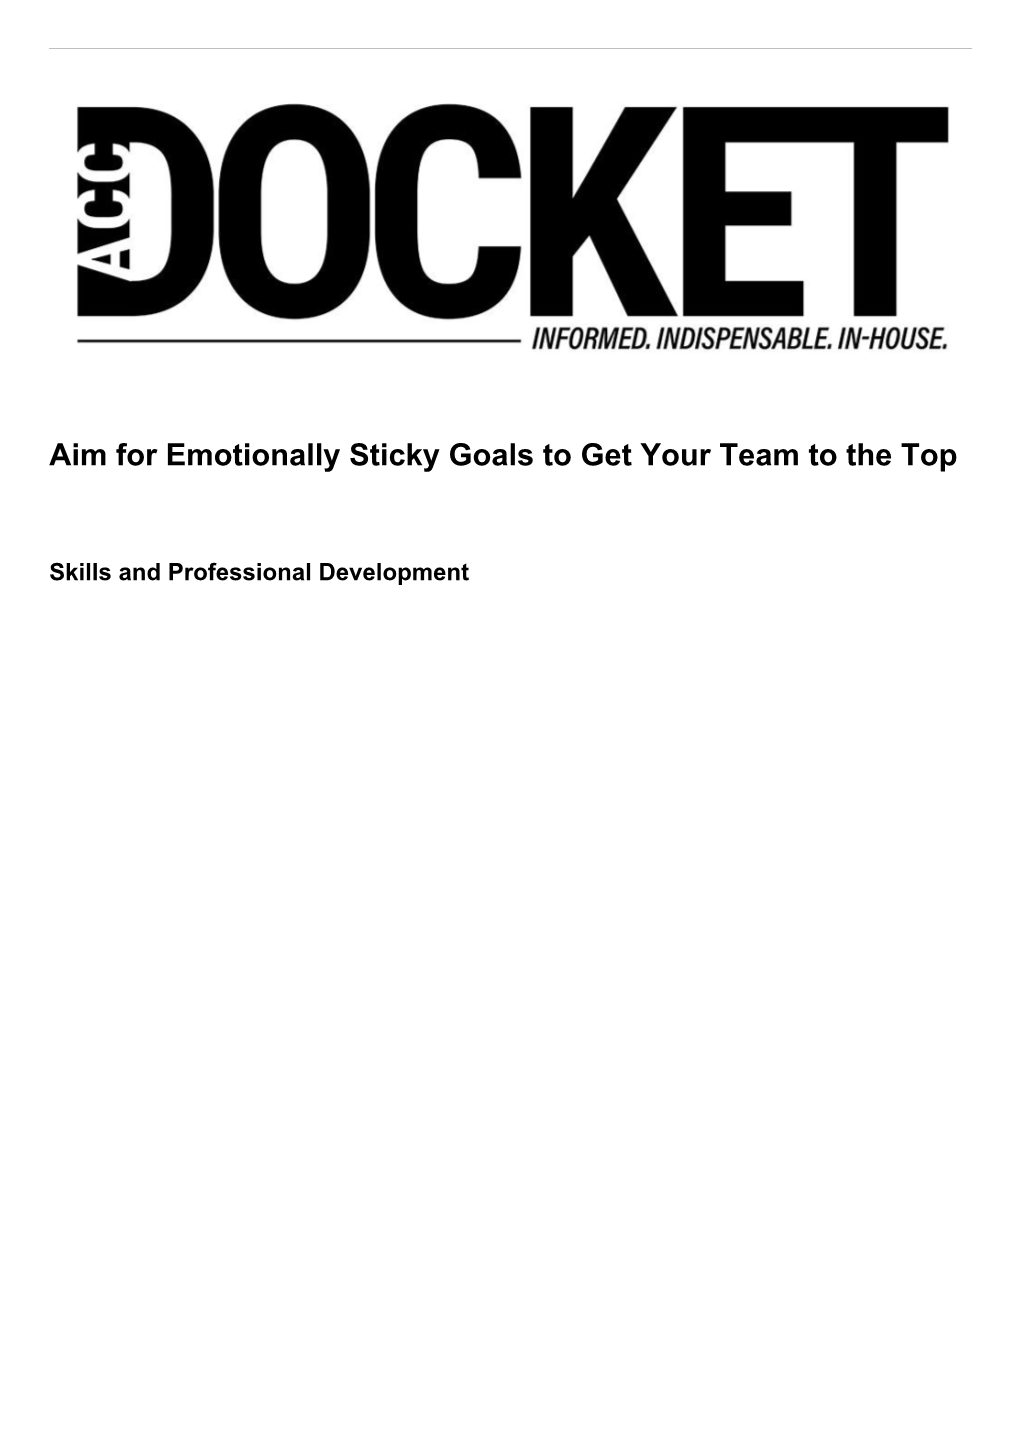 Aim for Emotionally Sticky Goals to Get Your Team to the Top